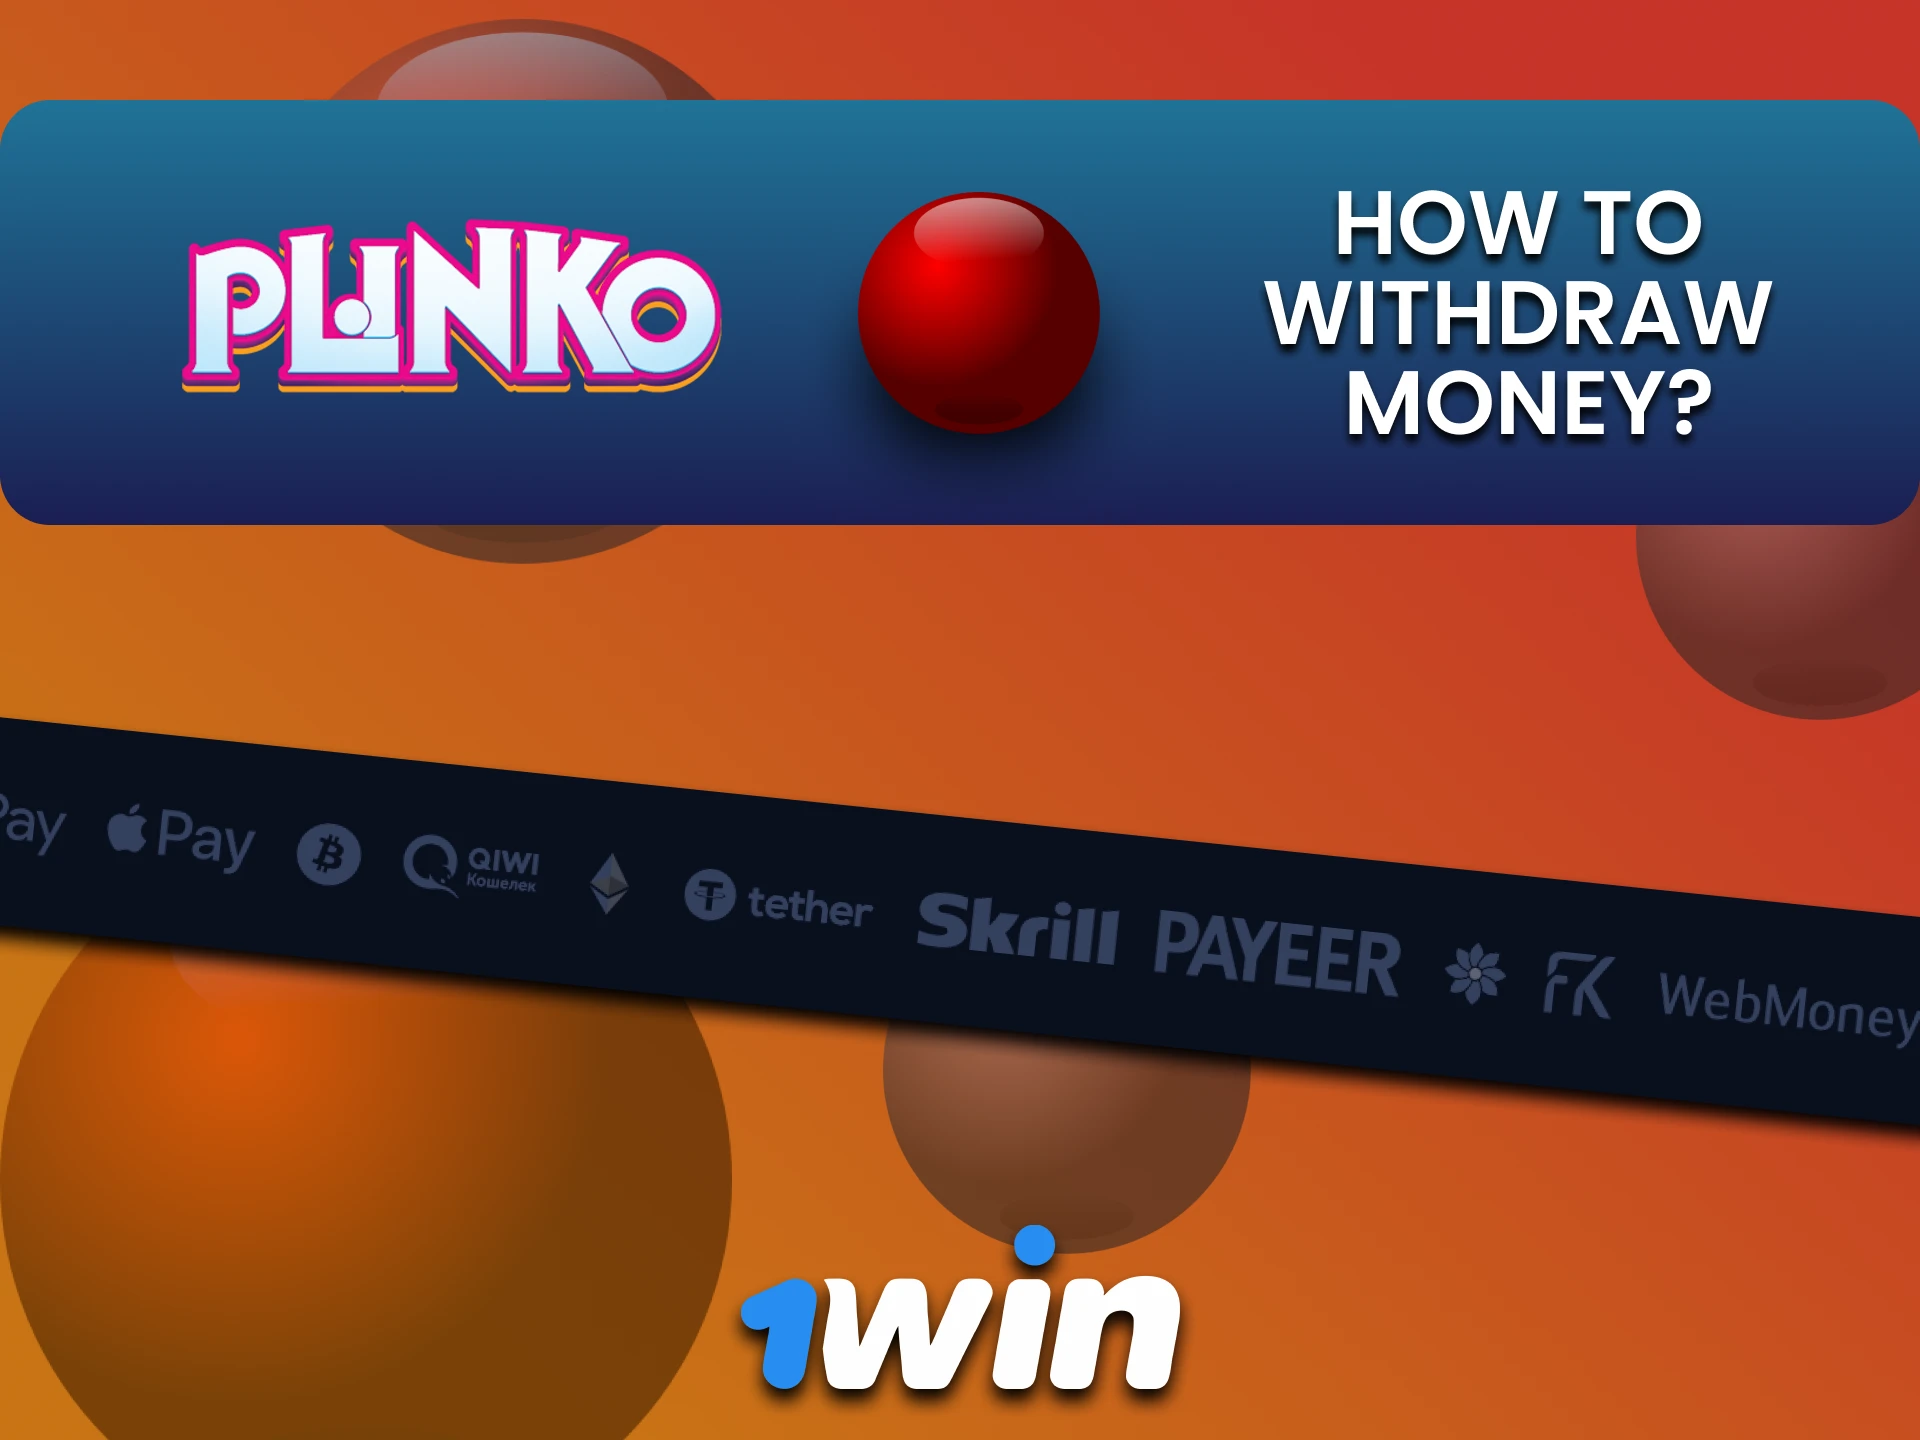 Find out about withdrawal methods for Plinko from 1win.